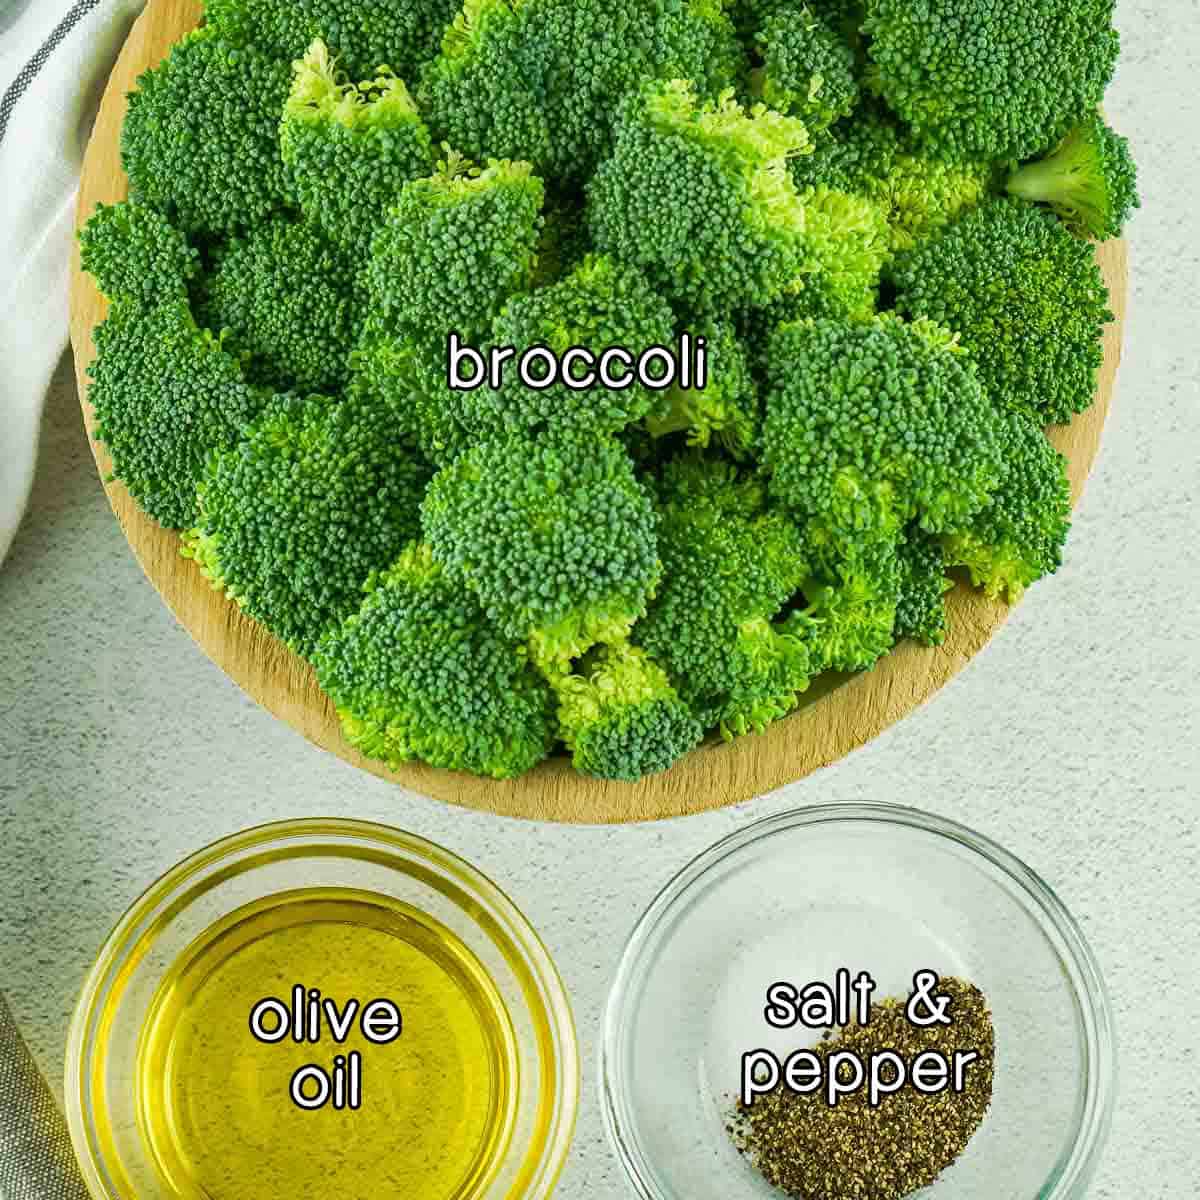 Overhead shot of ingredients - broccoli, olive oil, and salt and pepper.